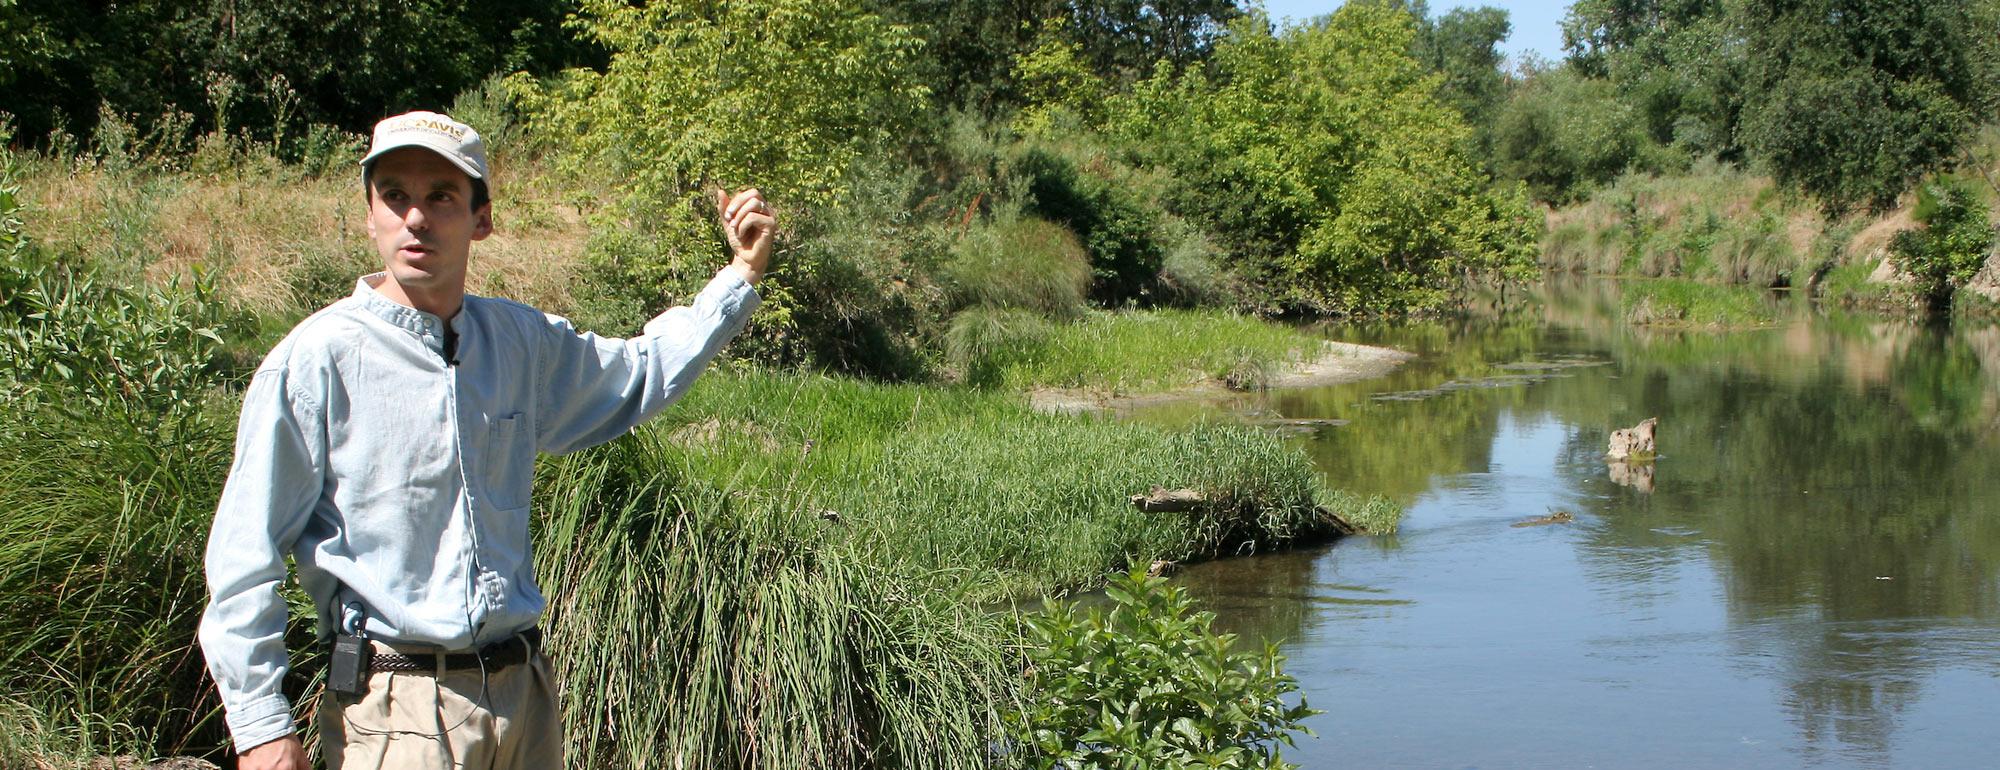 A ˽̳ Davis researcher points at a wetlands areas behind him